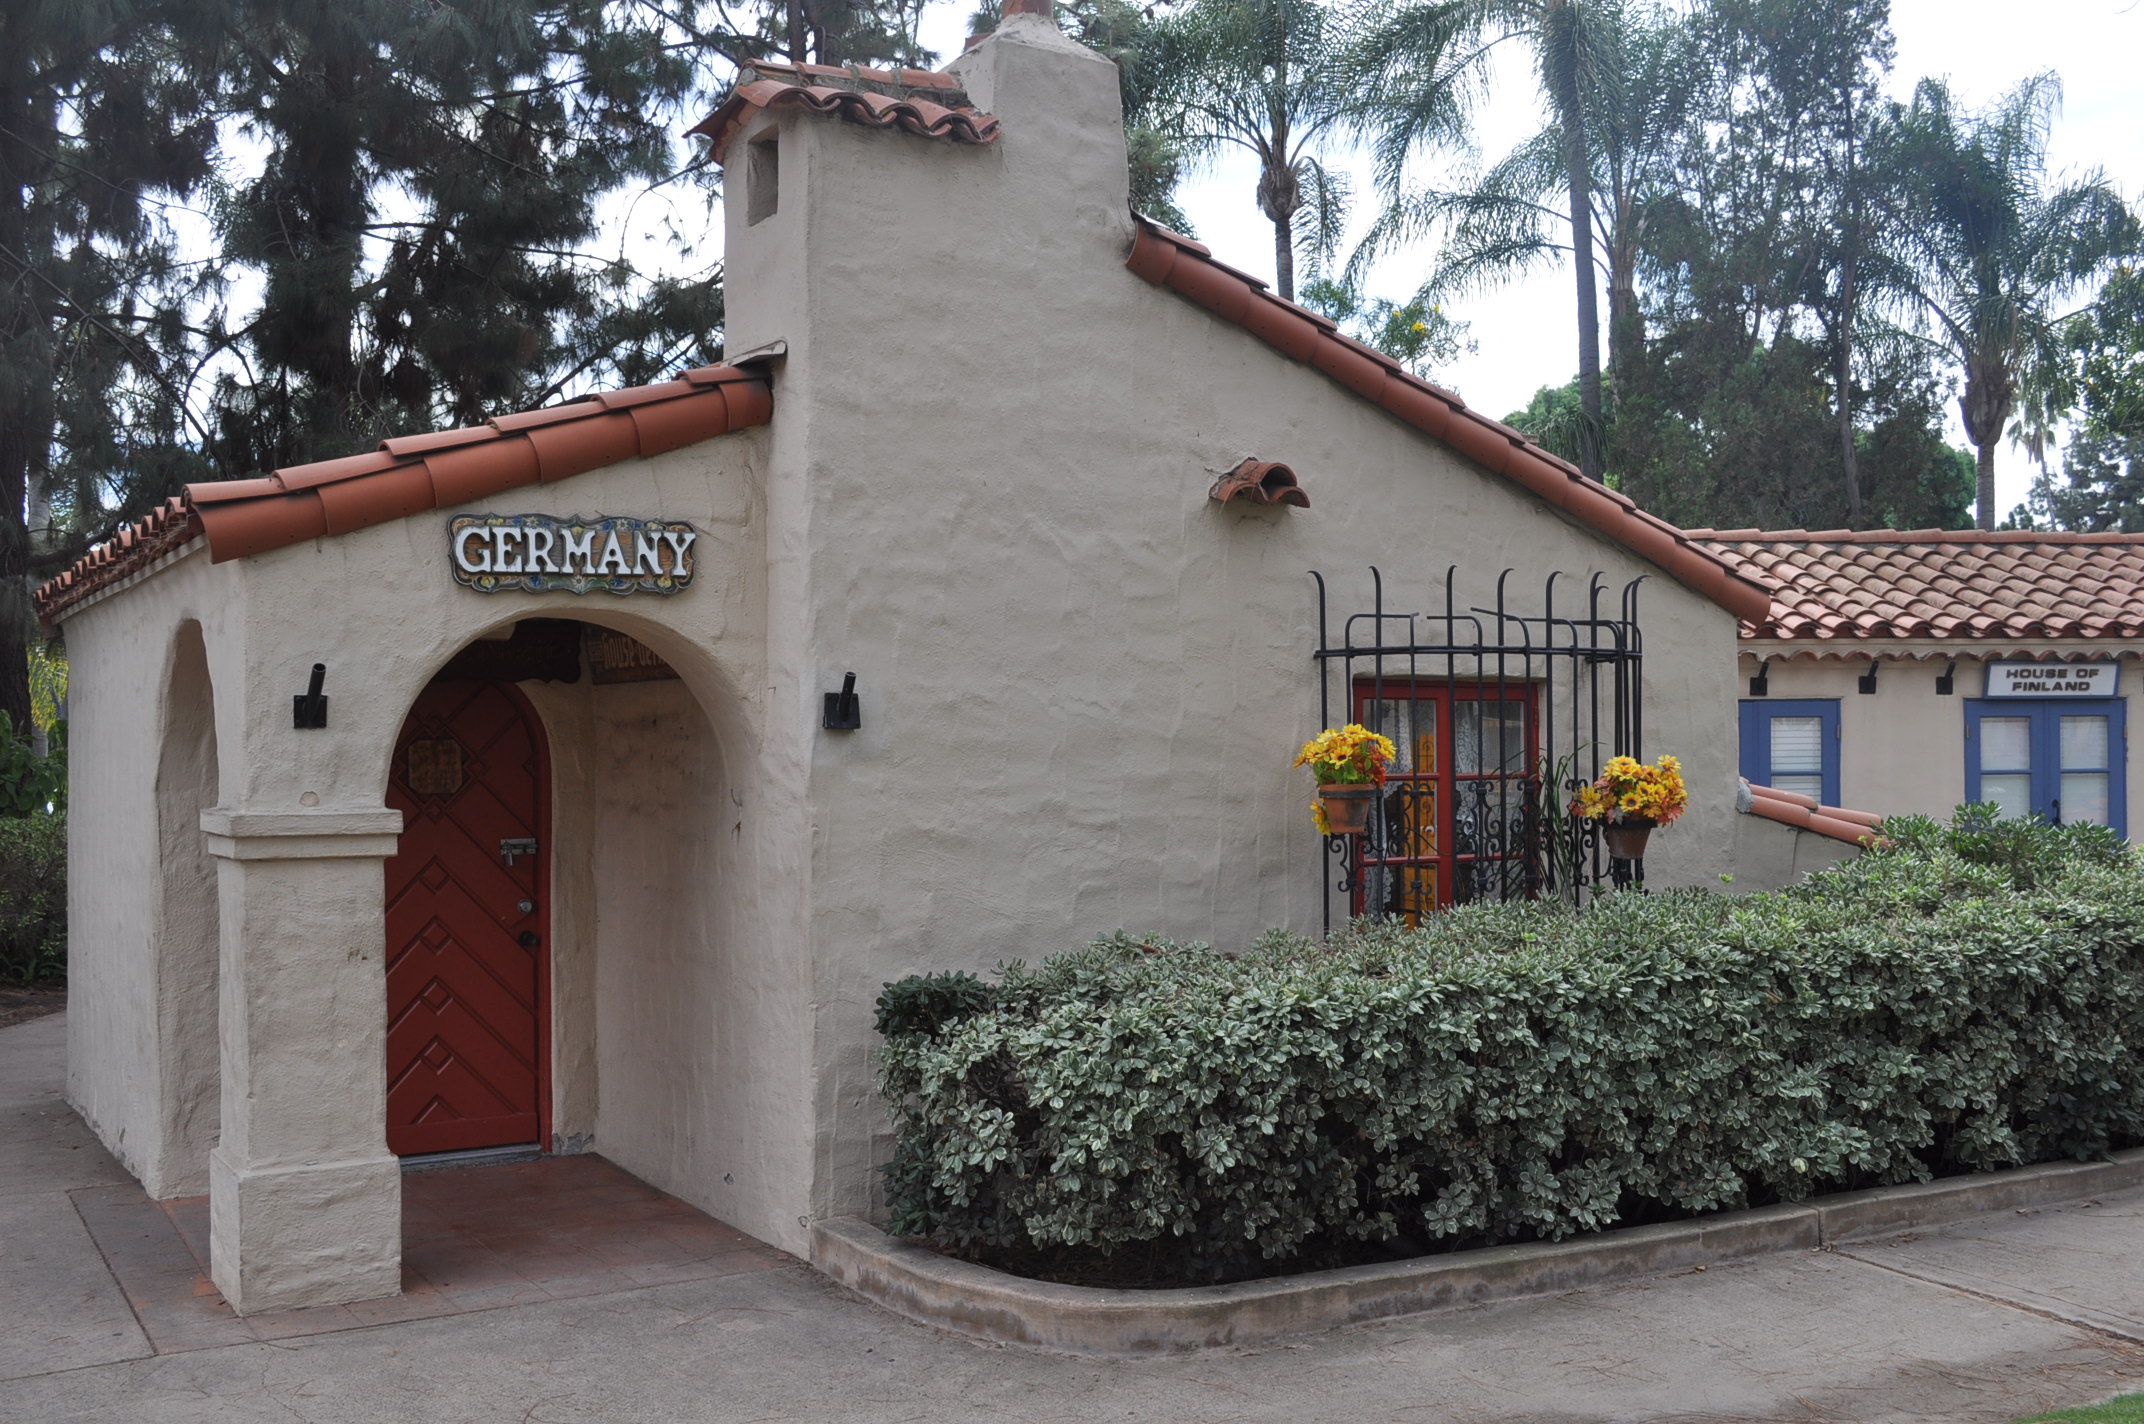 More International Cottages Coming to Balboa Park NBC 7 San Diego